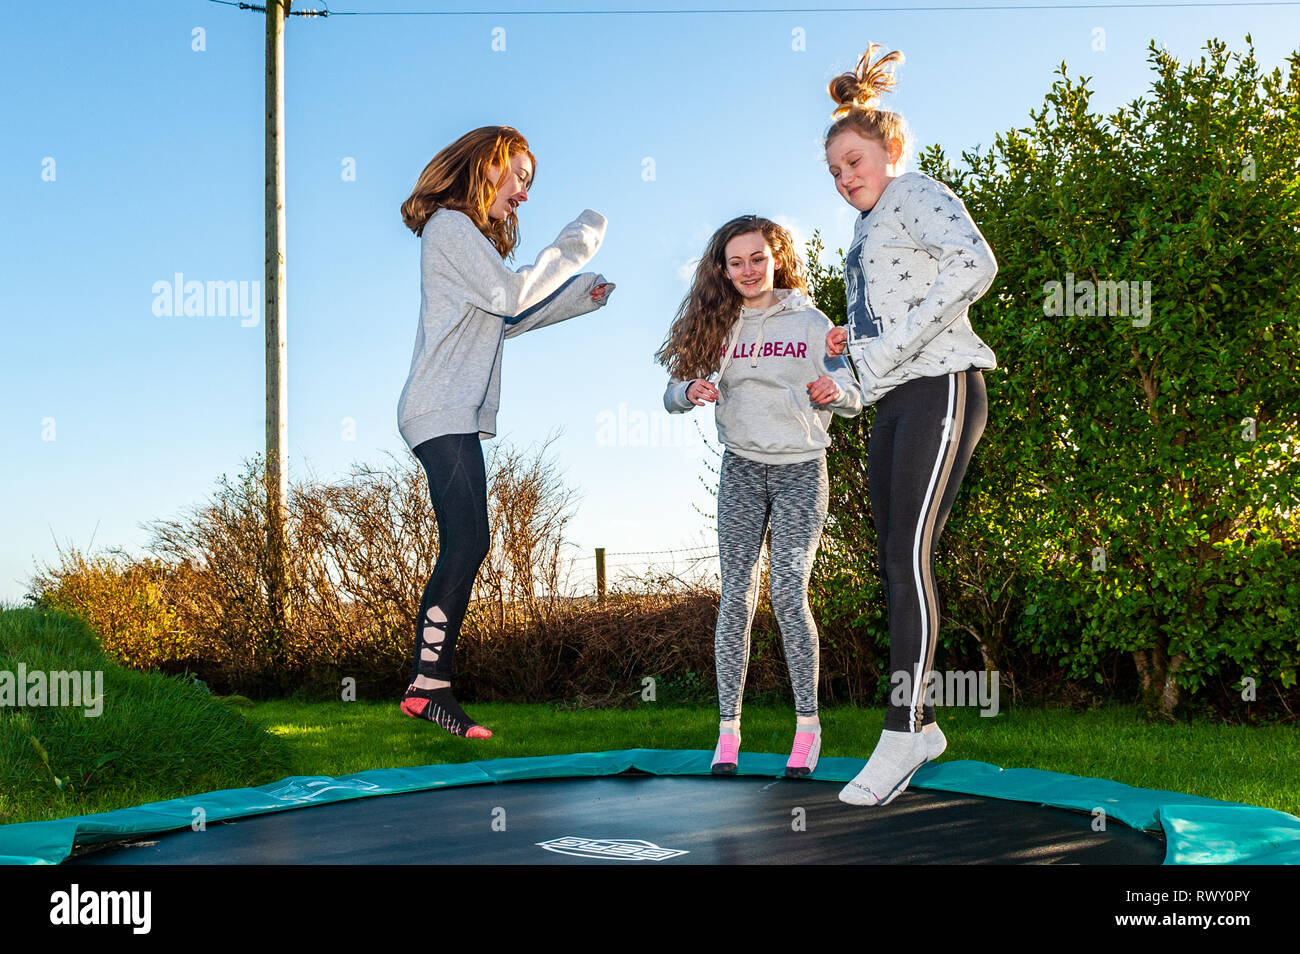 Ballydehob, West Cork, Ireland. 7th March, 2019. Girls make the most of the hot, sunny weather by bouncing on a trampoline. The day will continue to be sunny whilst tomorrow will start off dry with showers developing in the afternoon. Credit: AG News/Alamy Live News. Stock Photo